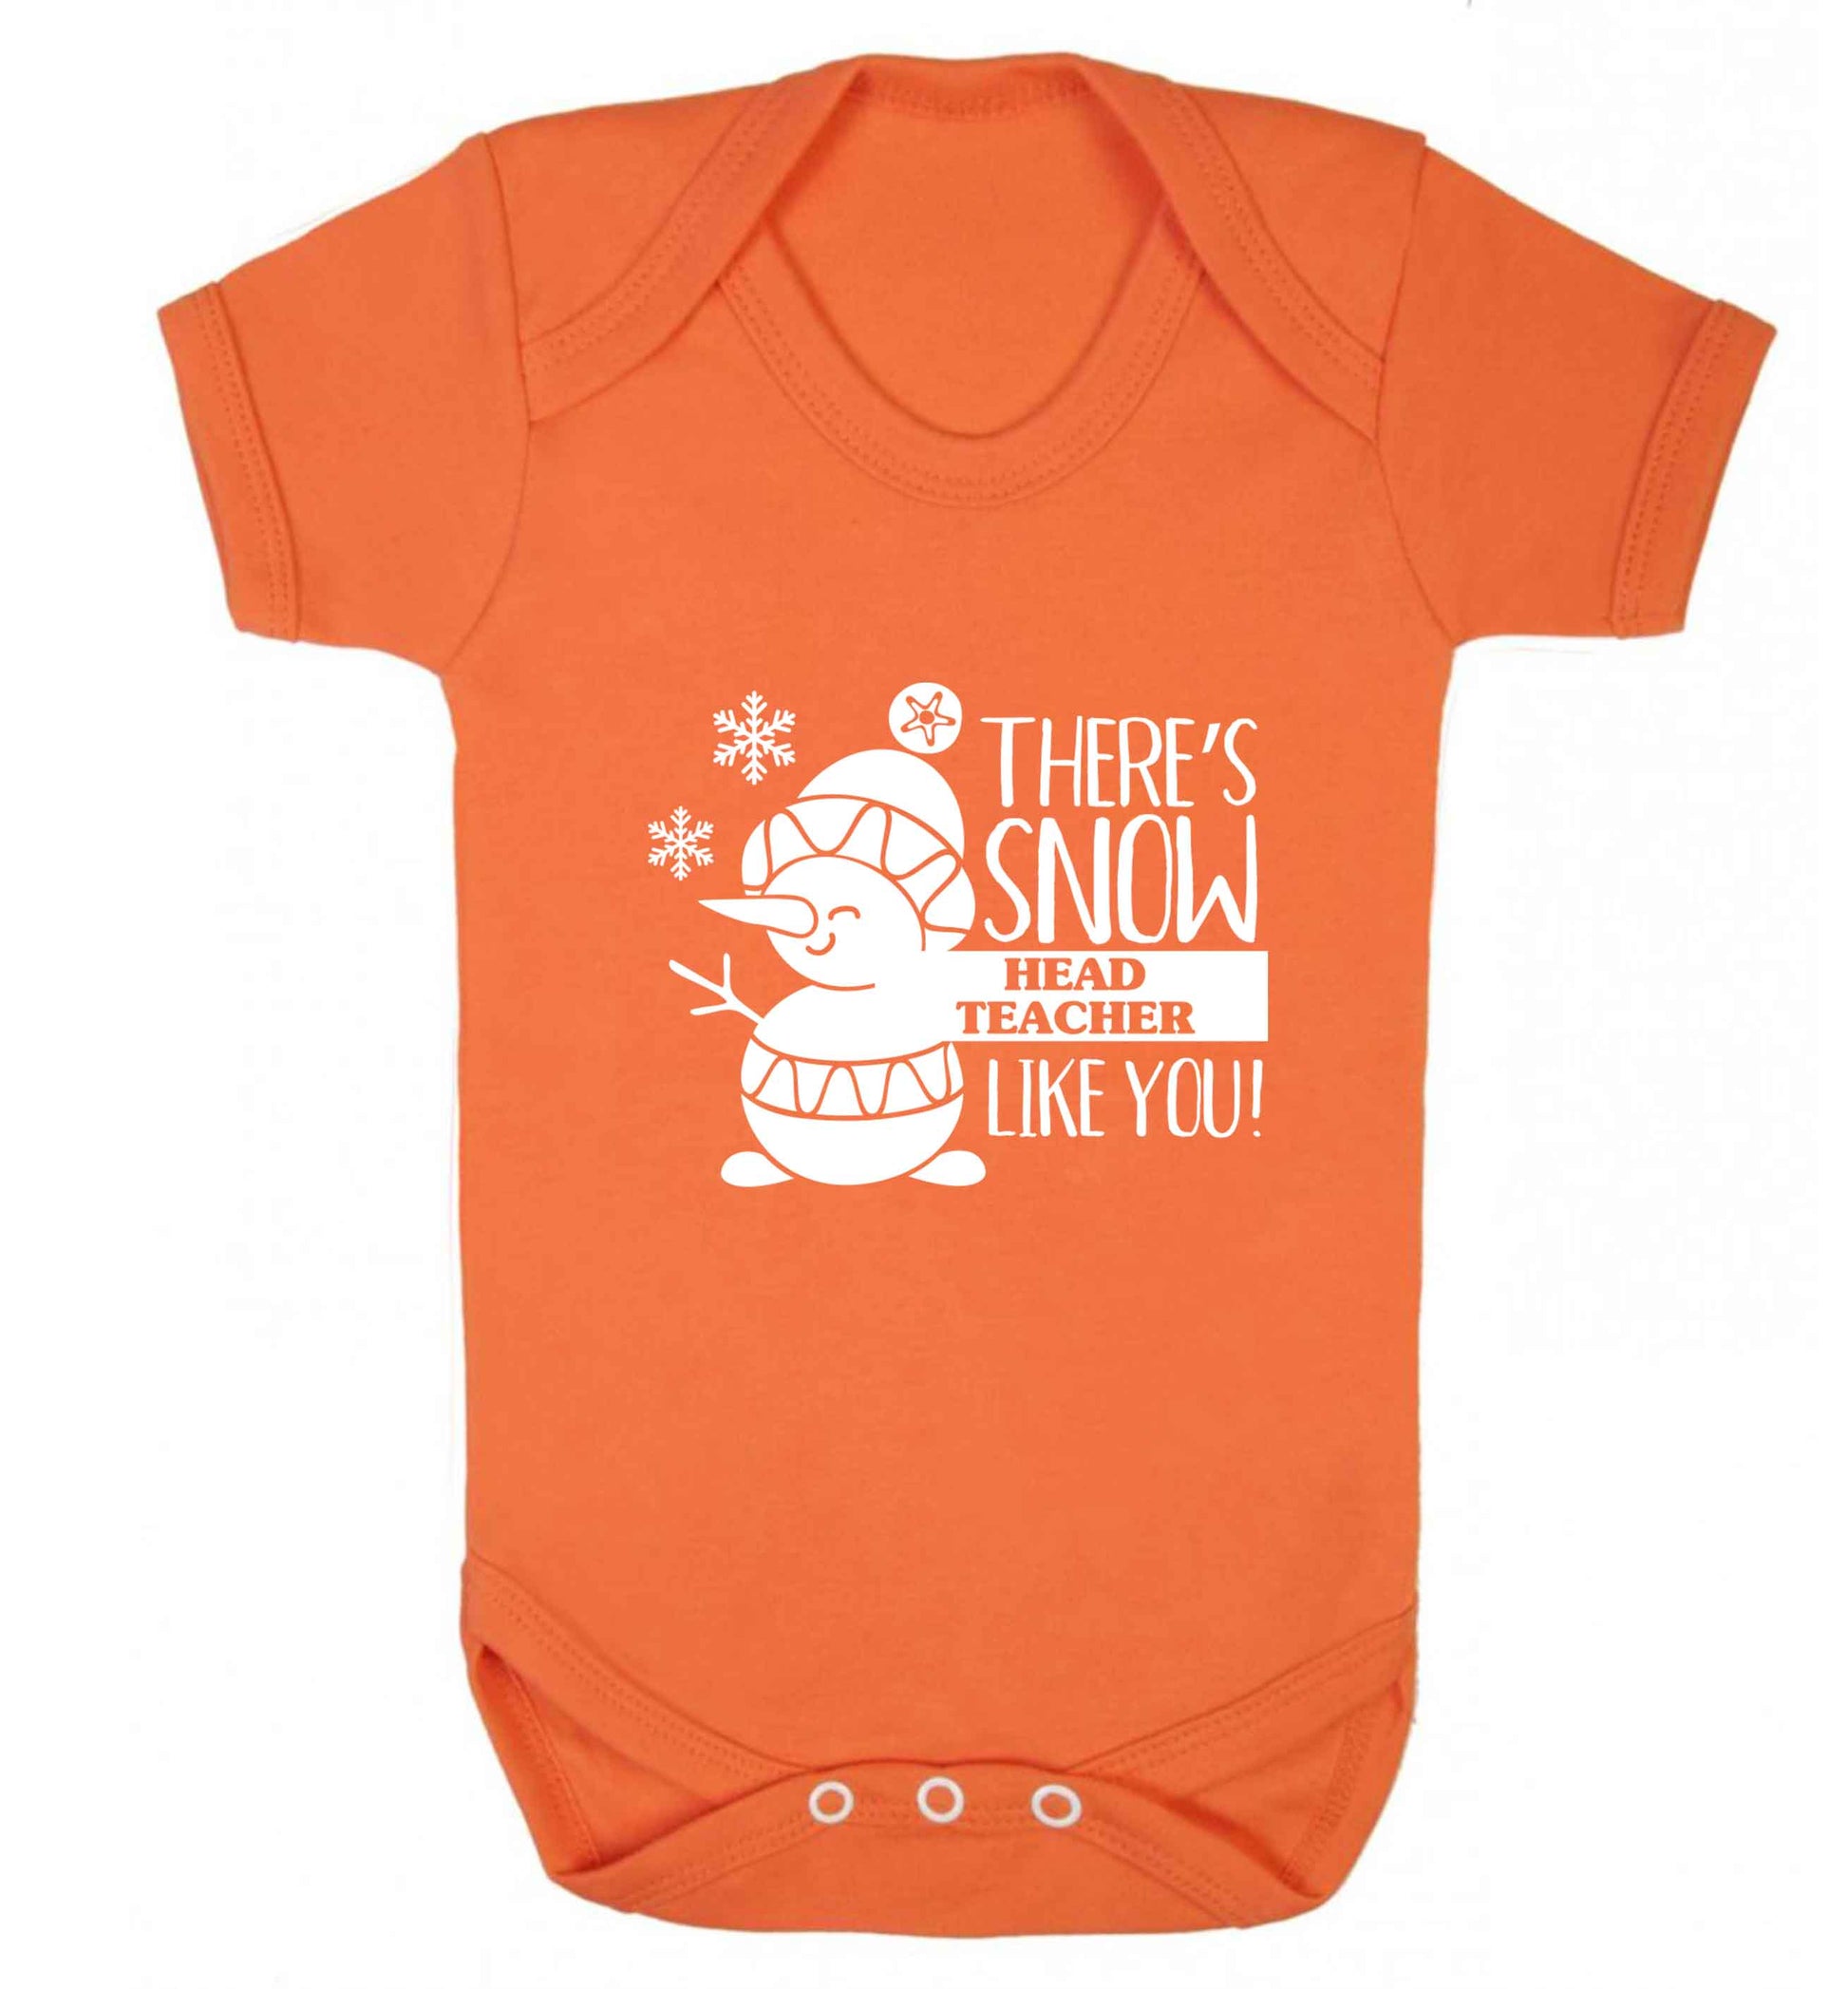 There's snow head teacher like you baby vest orange 18-24 months